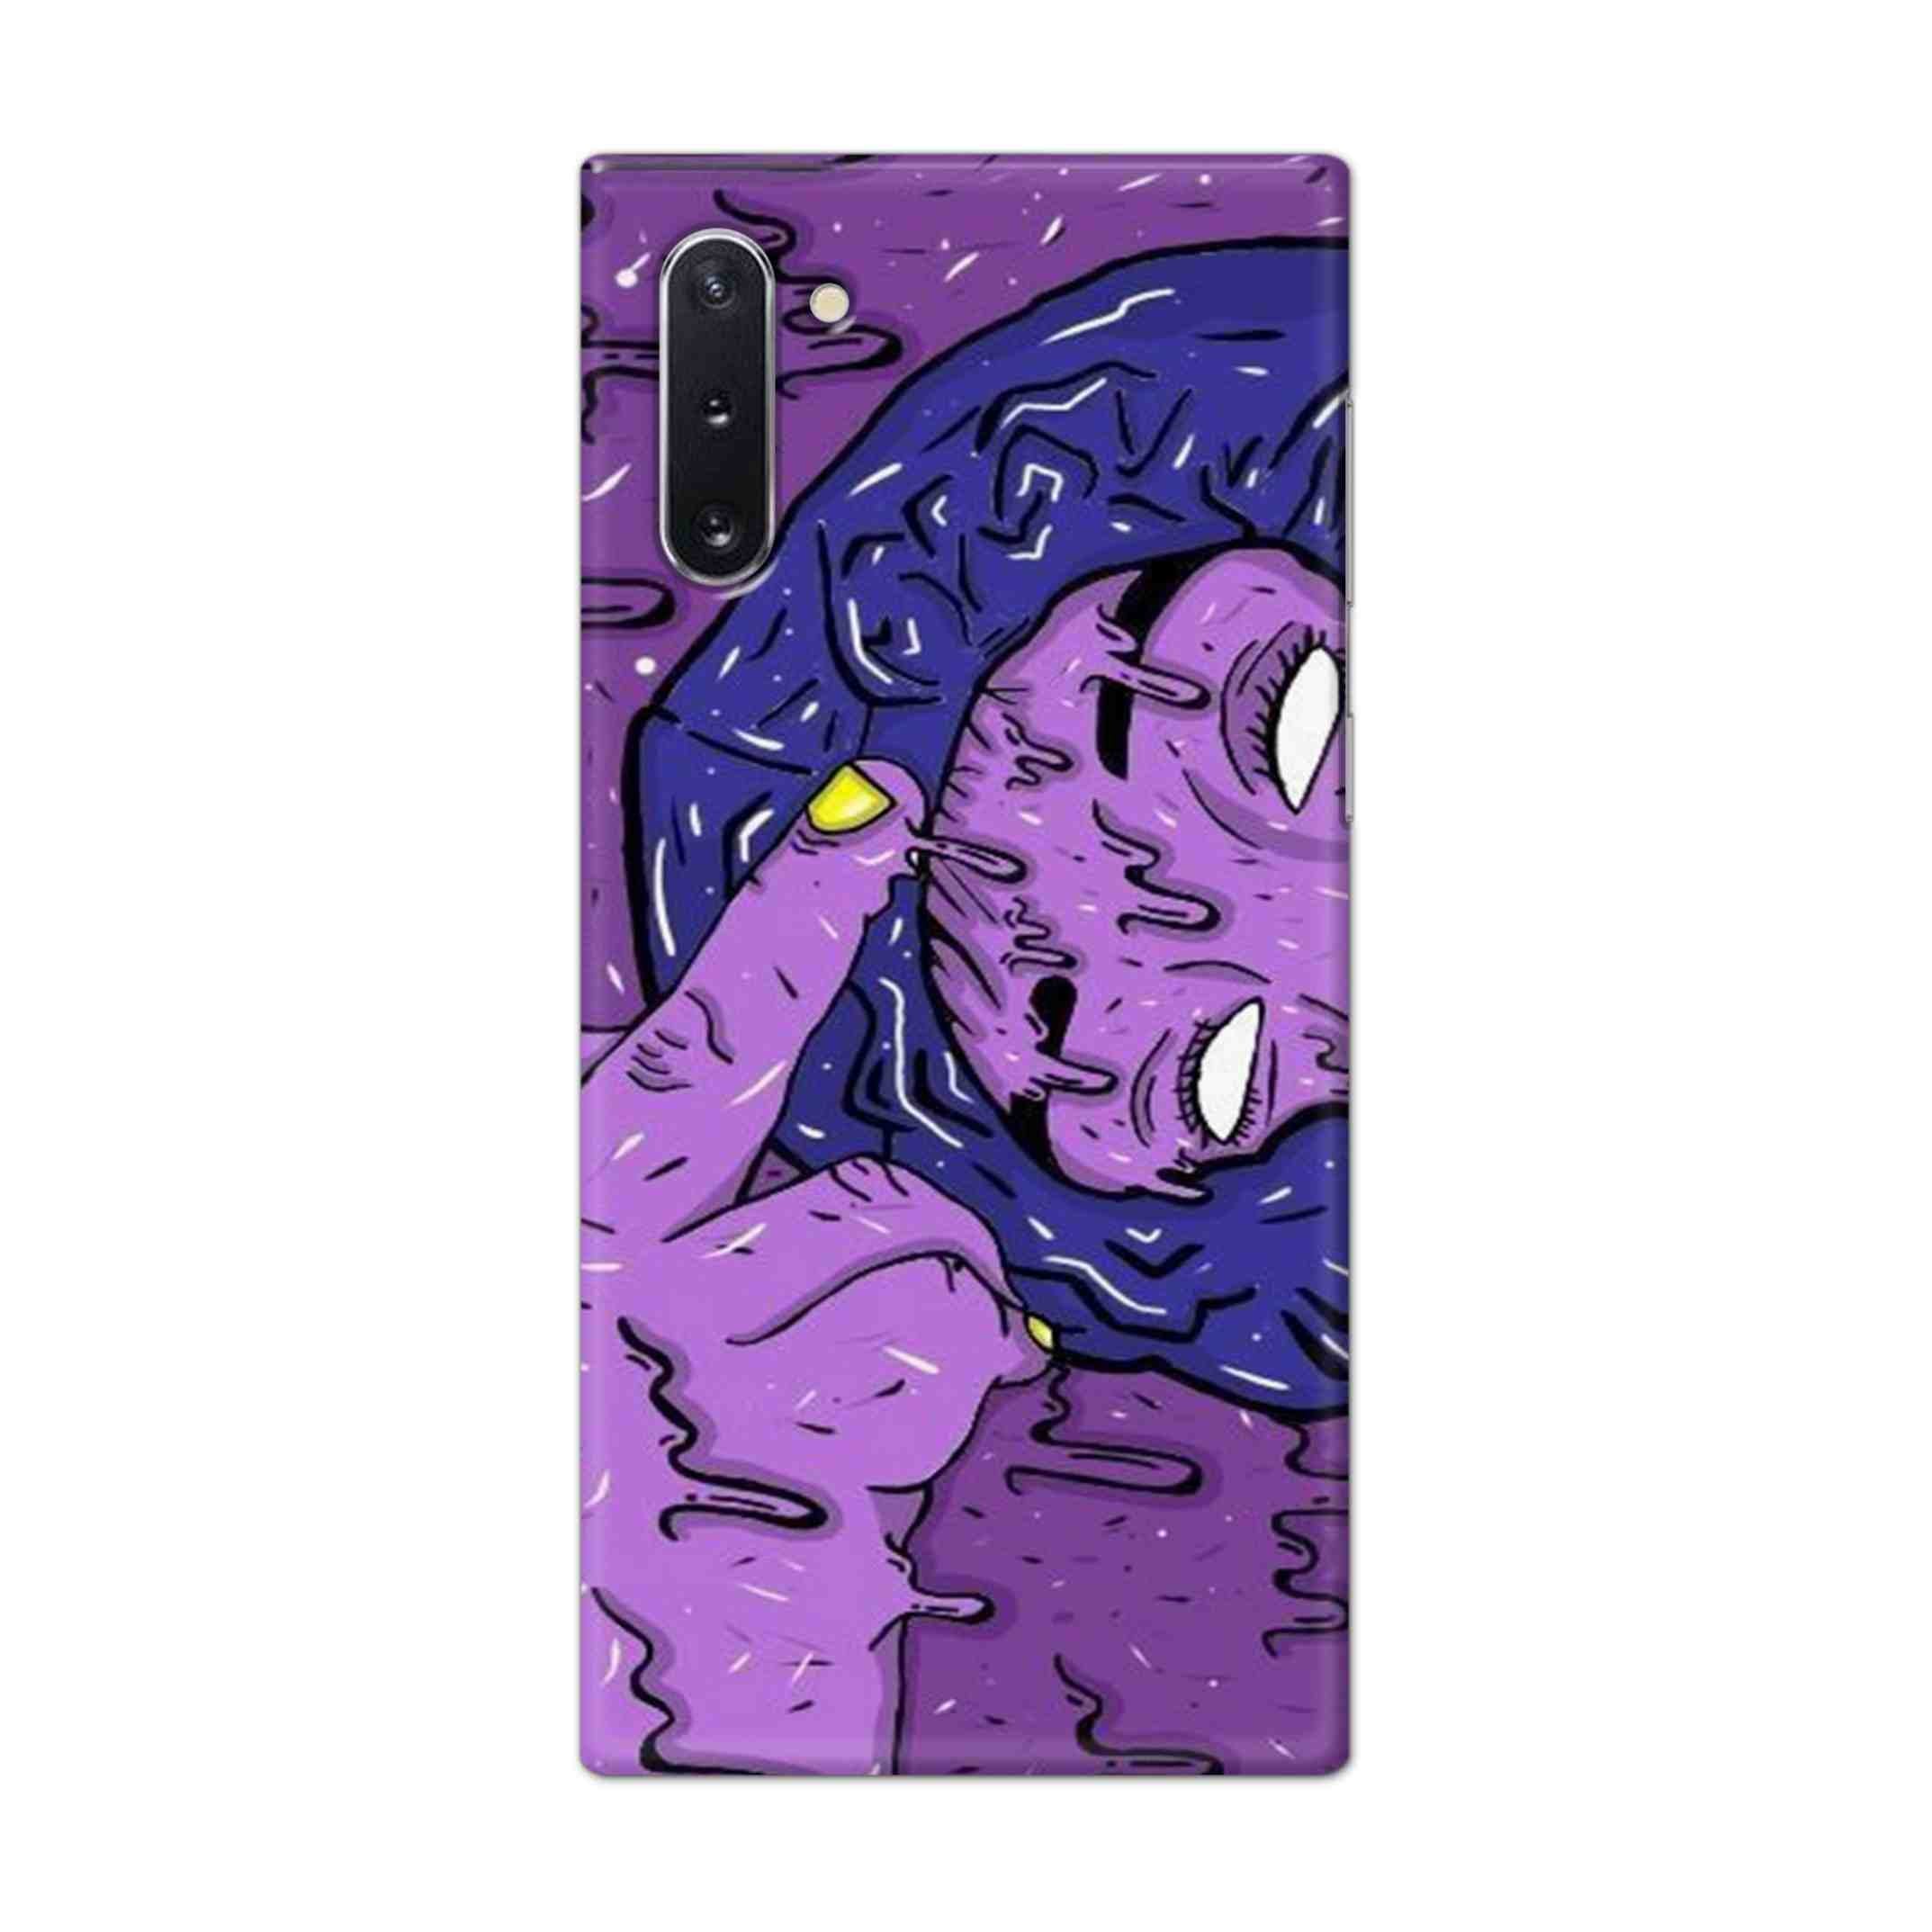 Buy Dashing Art Hard Back Mobile Phone Case Cover For Samsung Galaxy Note 10 Online